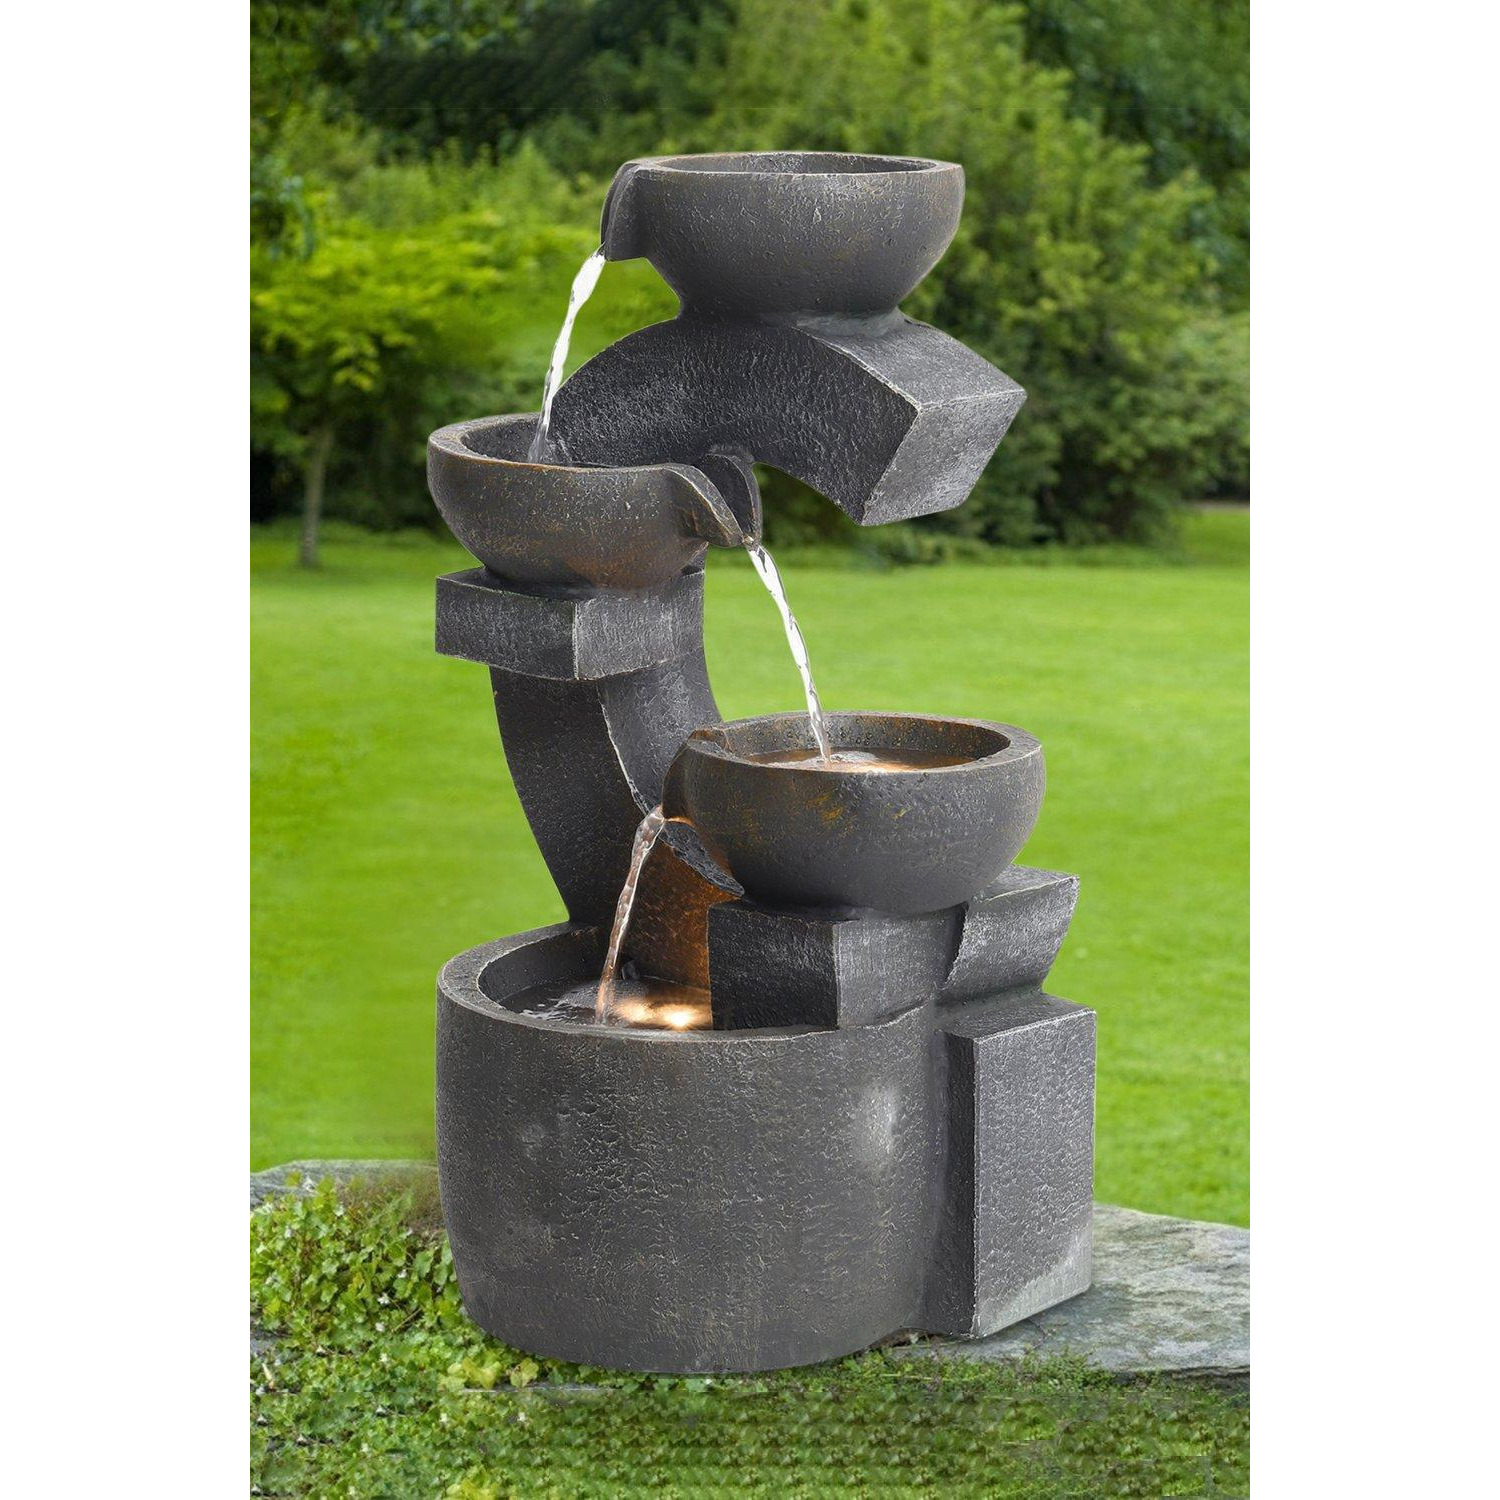 Cascading C Shaped Water Feature Garden Fountain - image 1